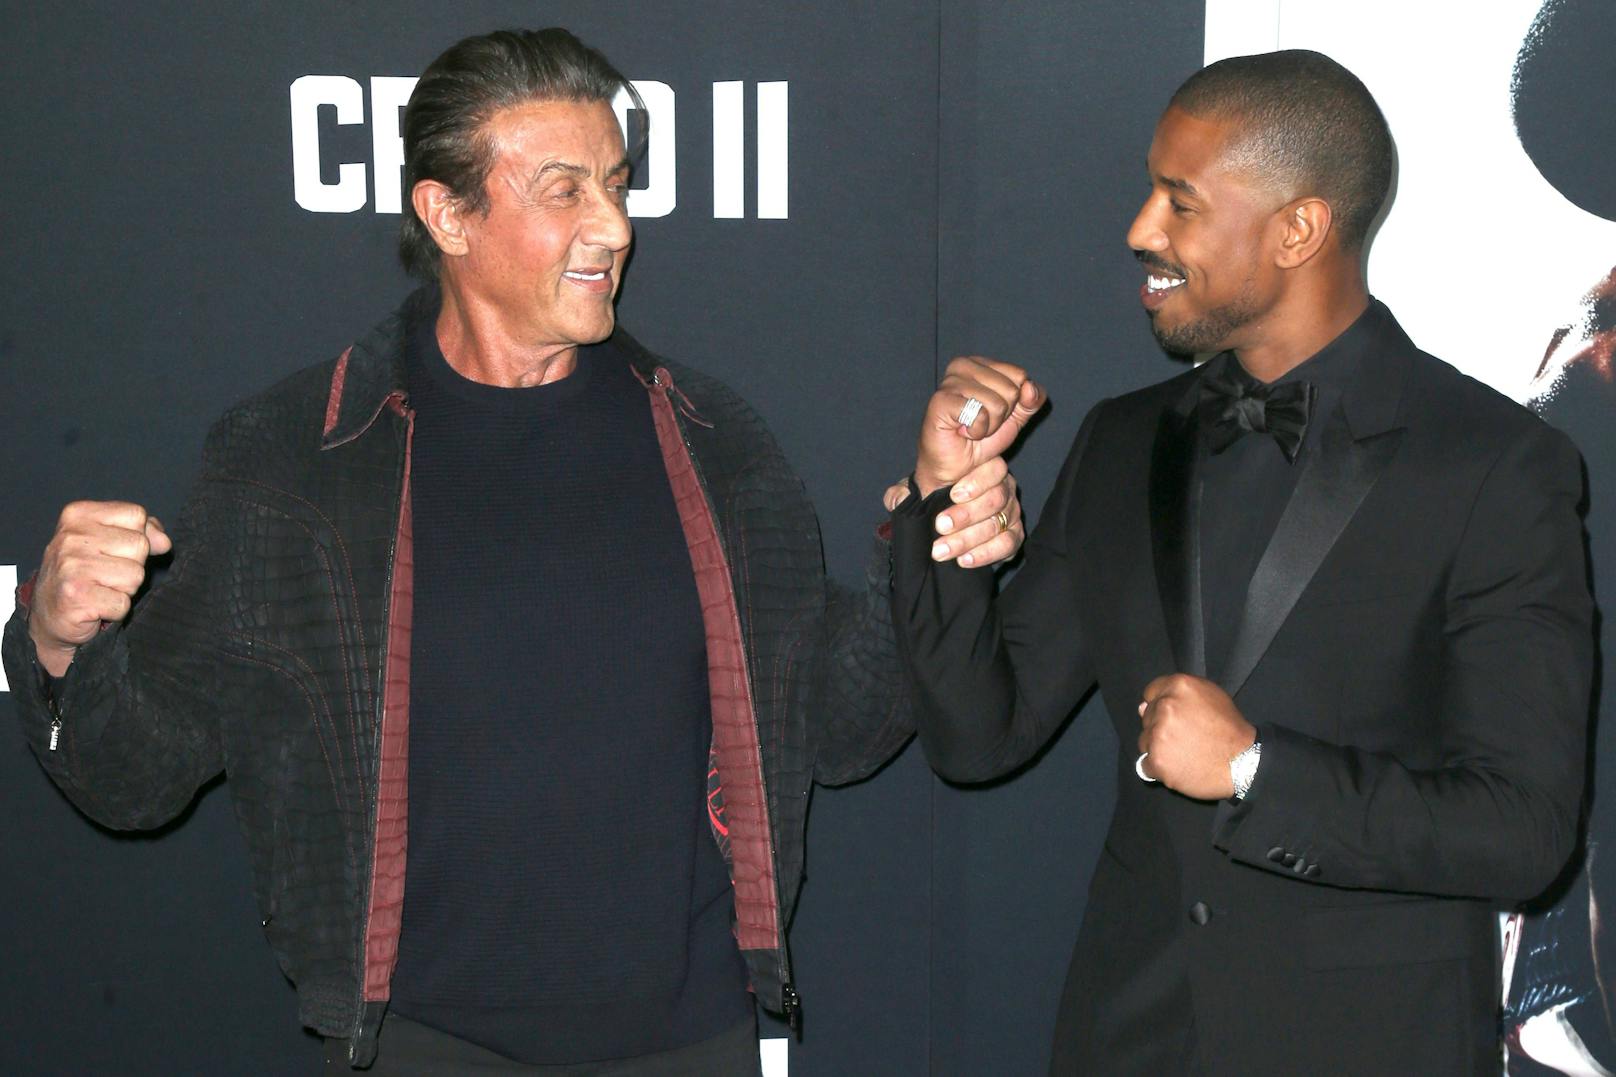 2015 und 2018 spielte er mit <strong>Sylvester Stallone</strong> in "Creed" und "Creed 2"